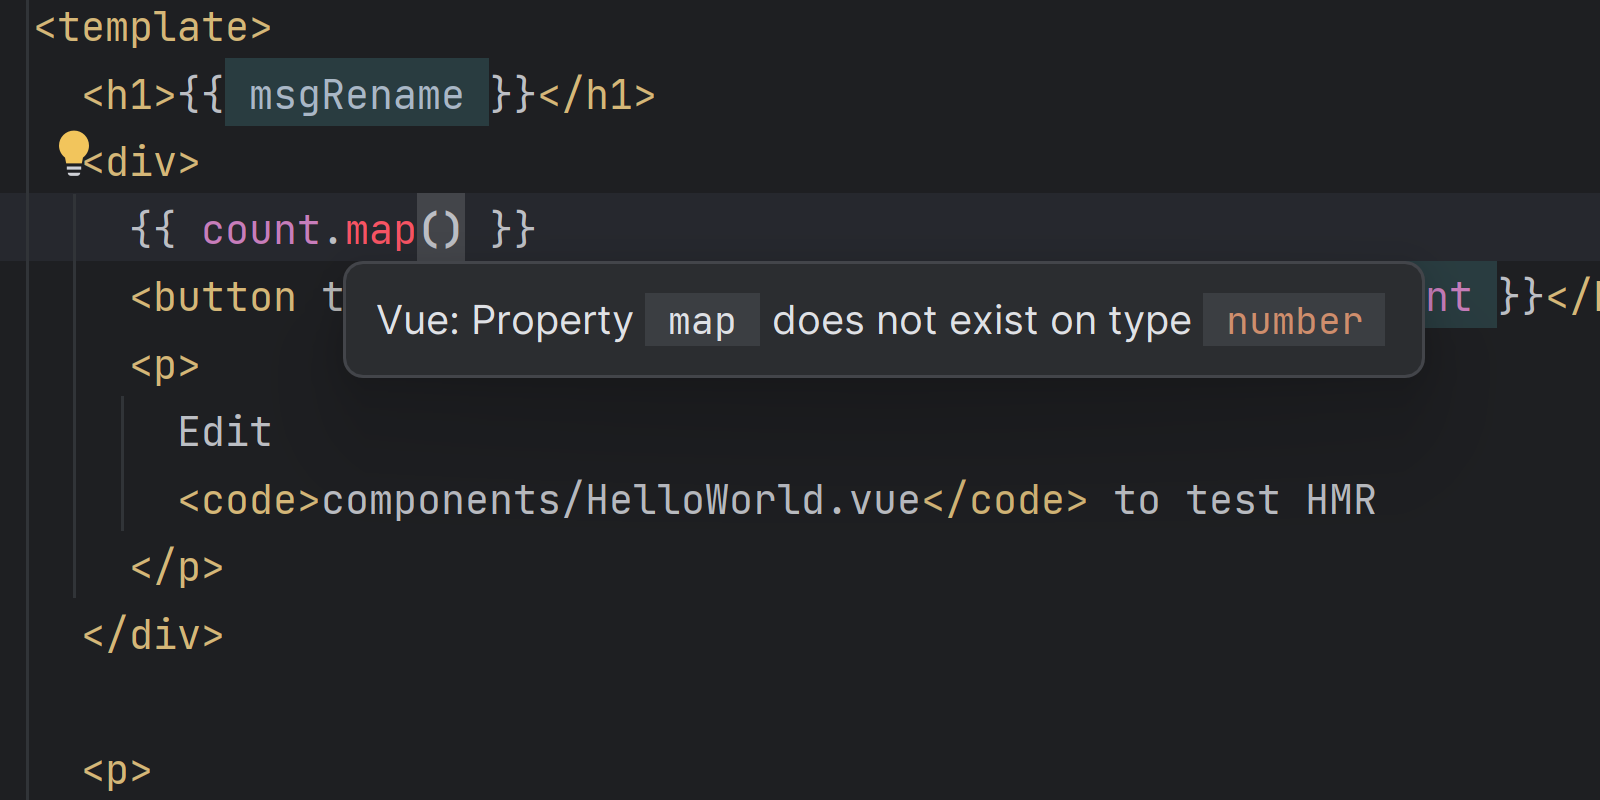 Showing the property map does not exist on type number error from the Vue Language Server